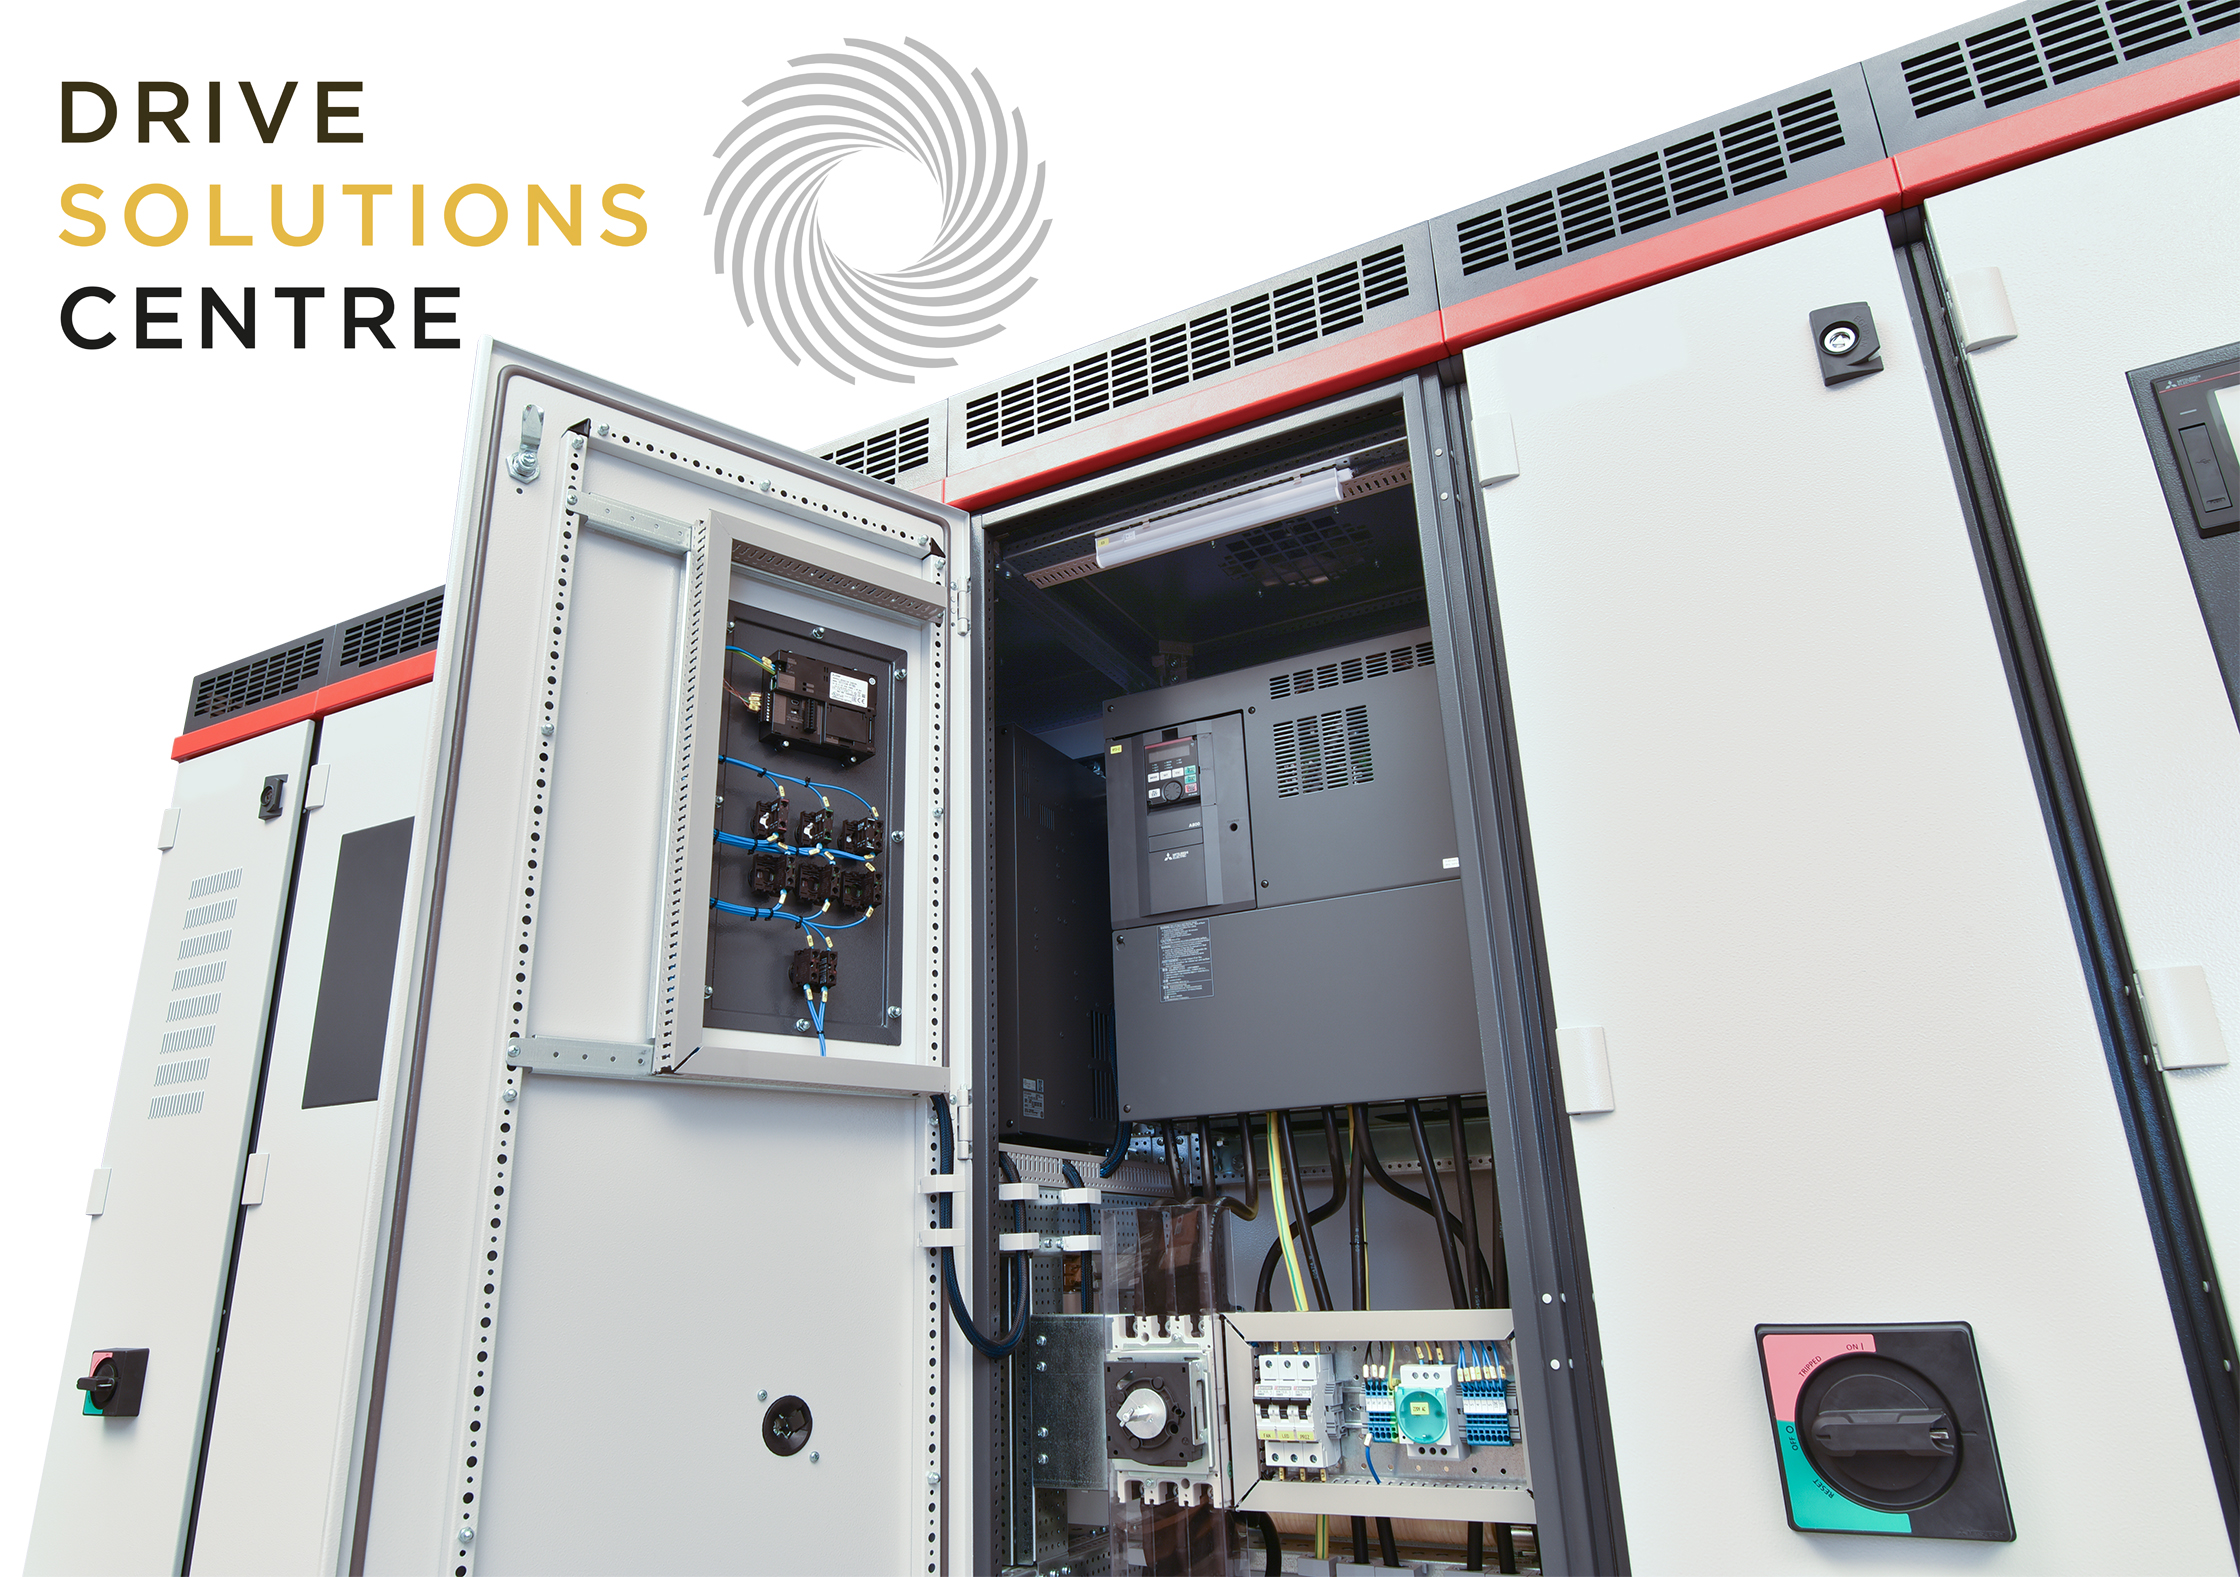 New Mitsubishi Electric Drive Solutions Centres will share technology, experience and ideas to focus on providing a full service offering for the entire lifecycle of larger medium voltage variable speed drives in the UK.